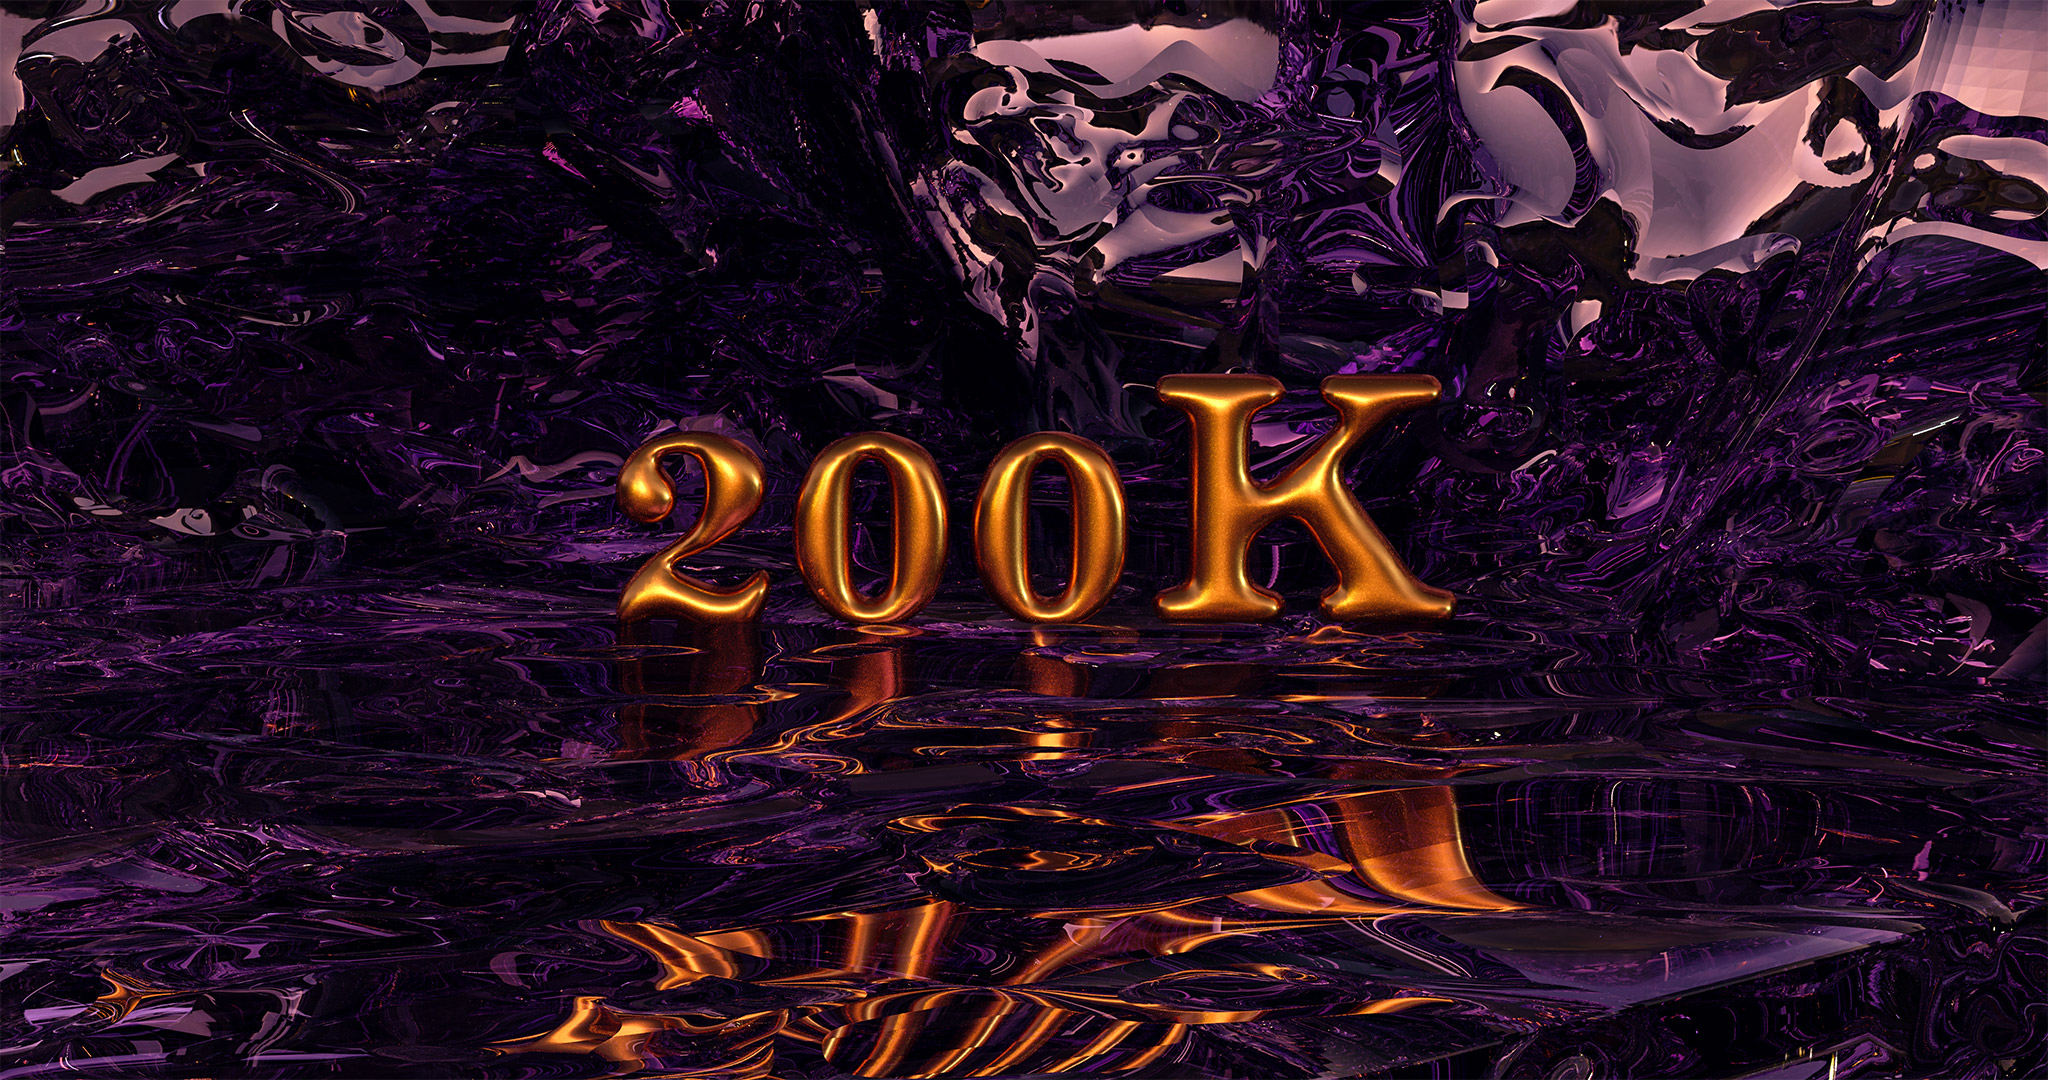 A realistic, 3D render of golden typography against an abstract, detailed, purple, glass environment. Typography reads: 200K.